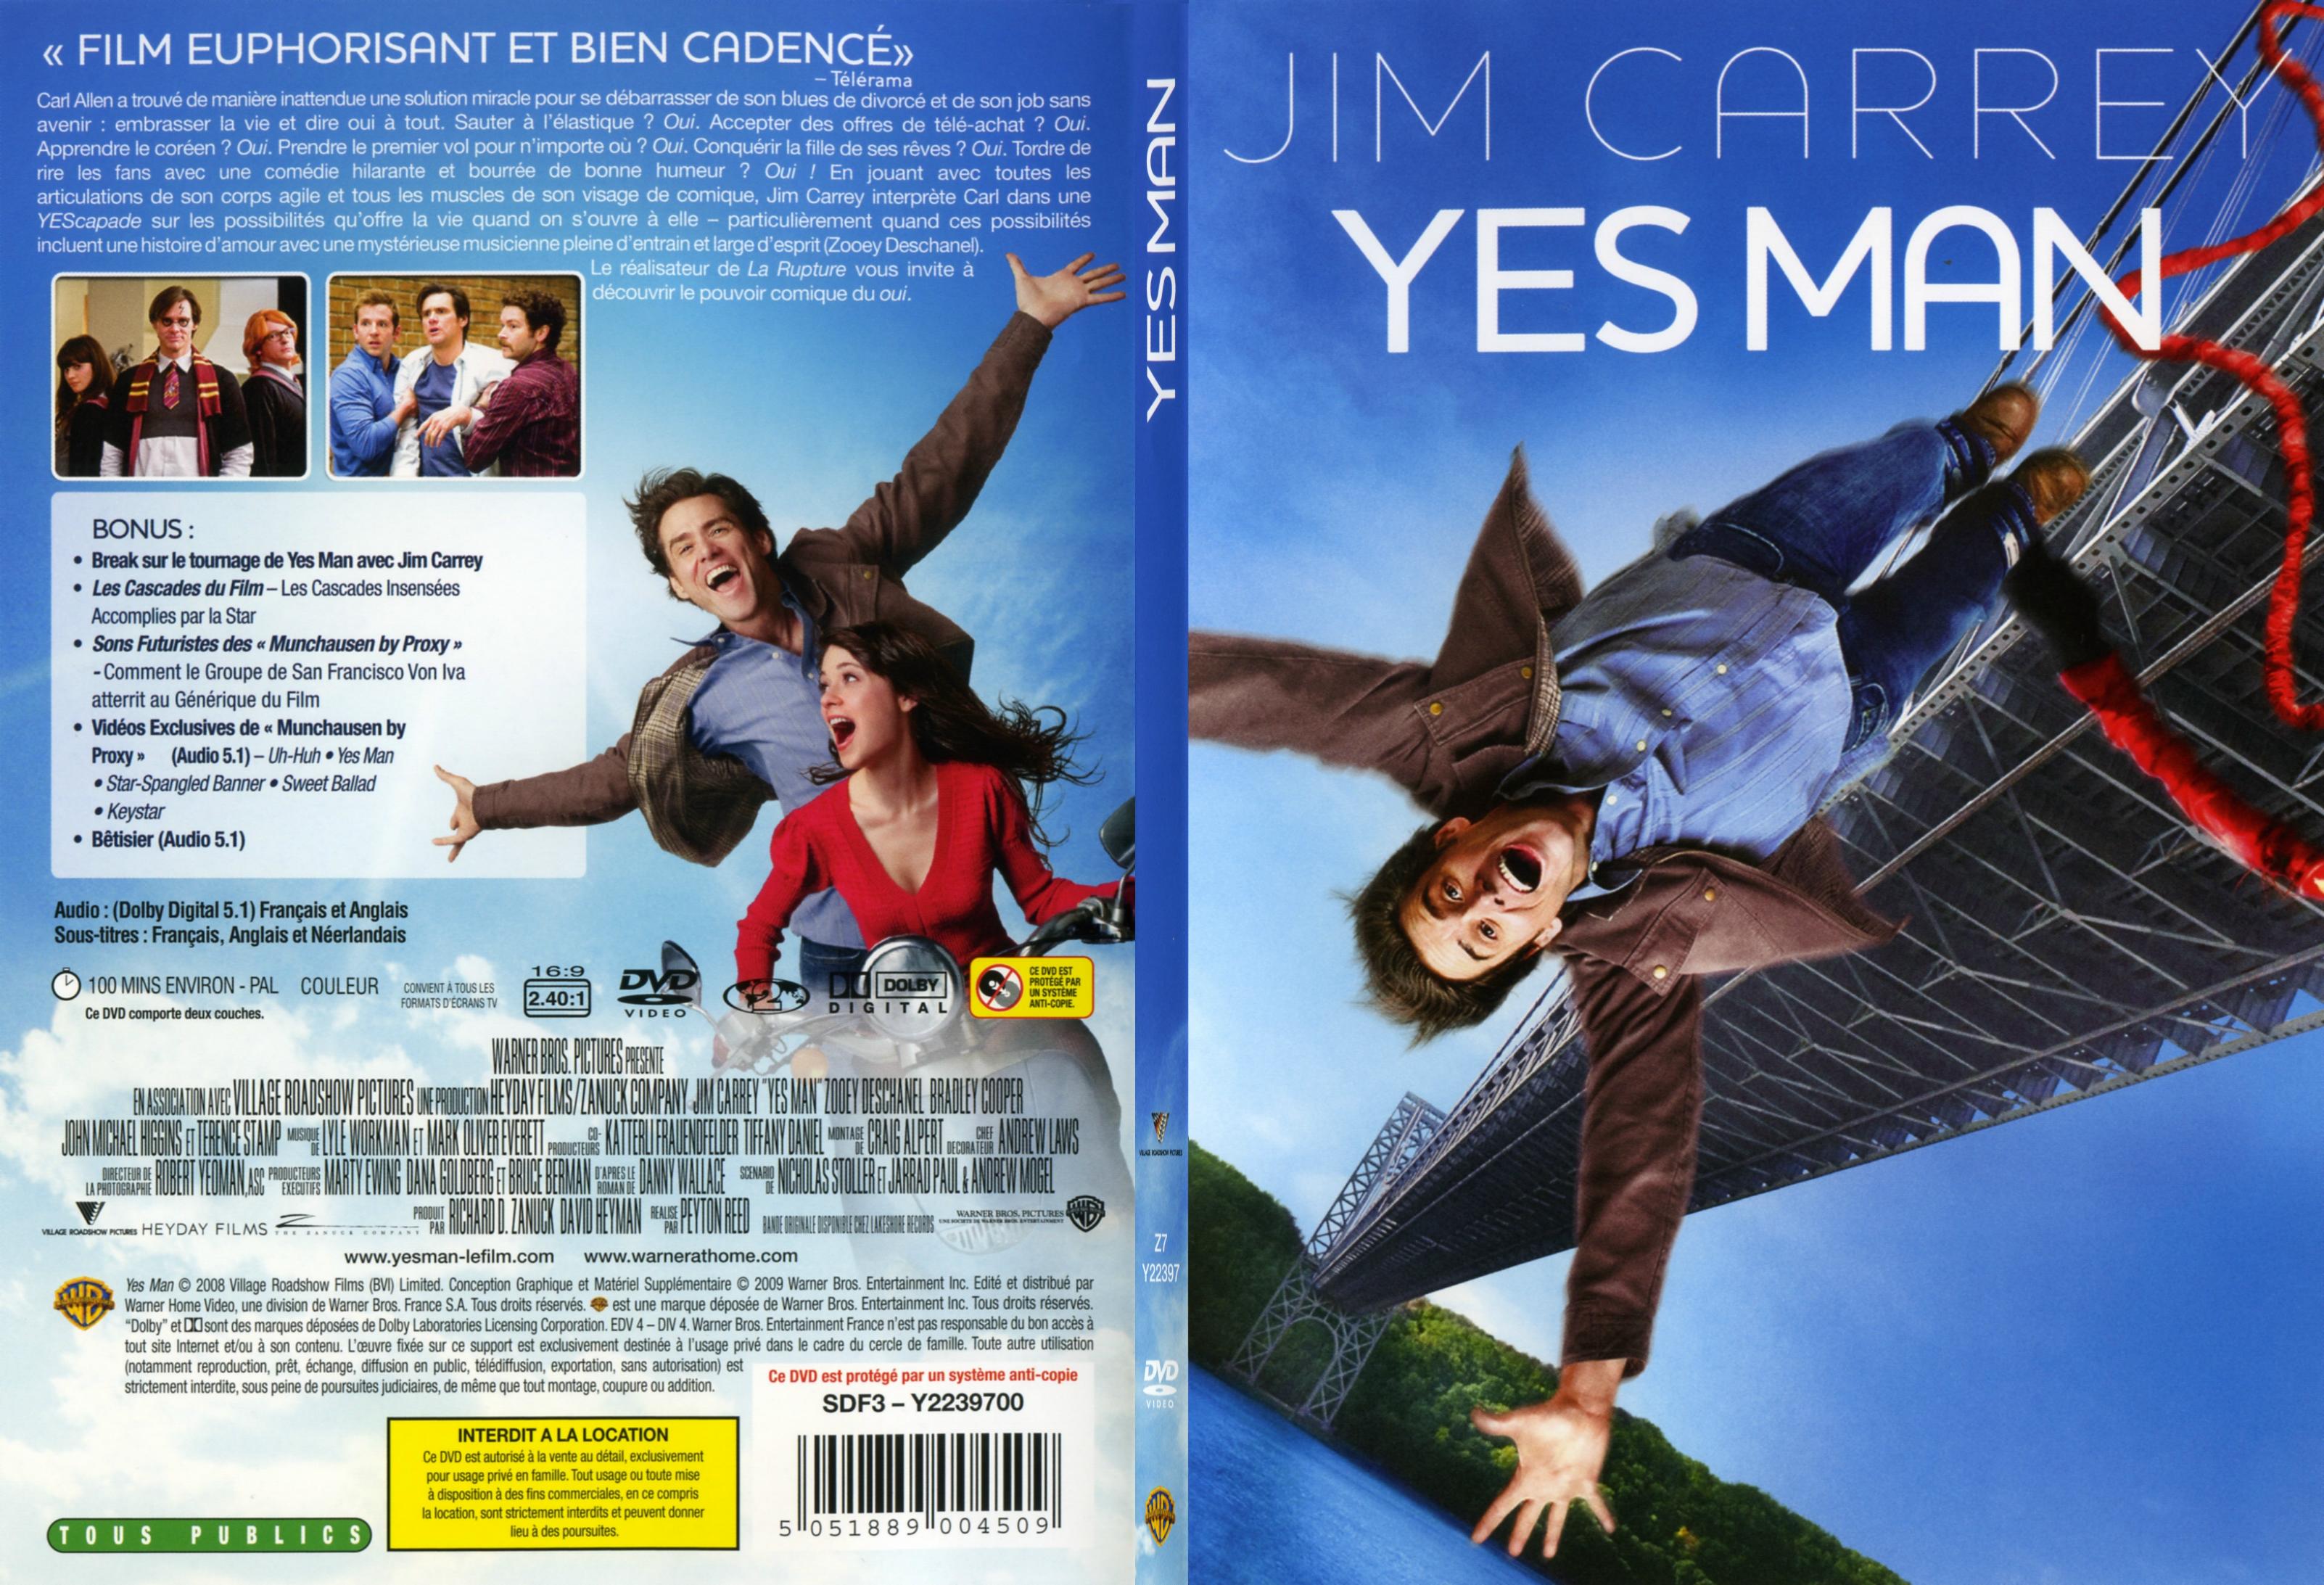 Jaquette DVD Yes man - SLIM